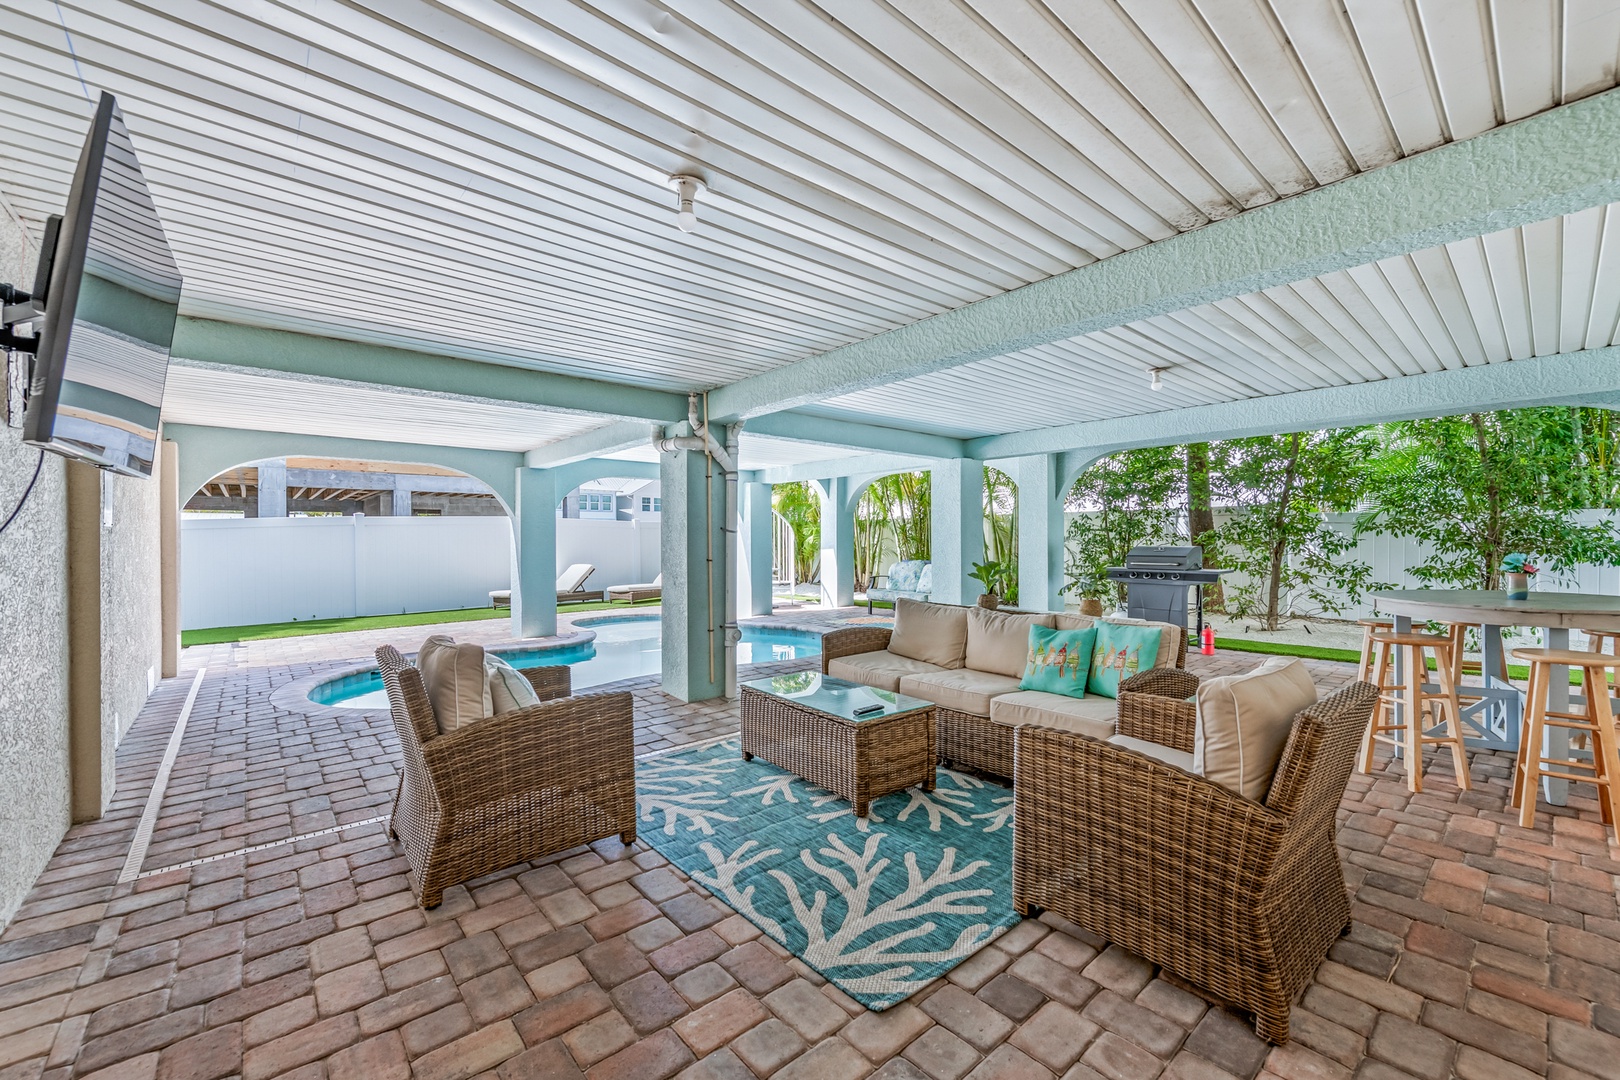 Covered Lanai and Outdoor Living Area